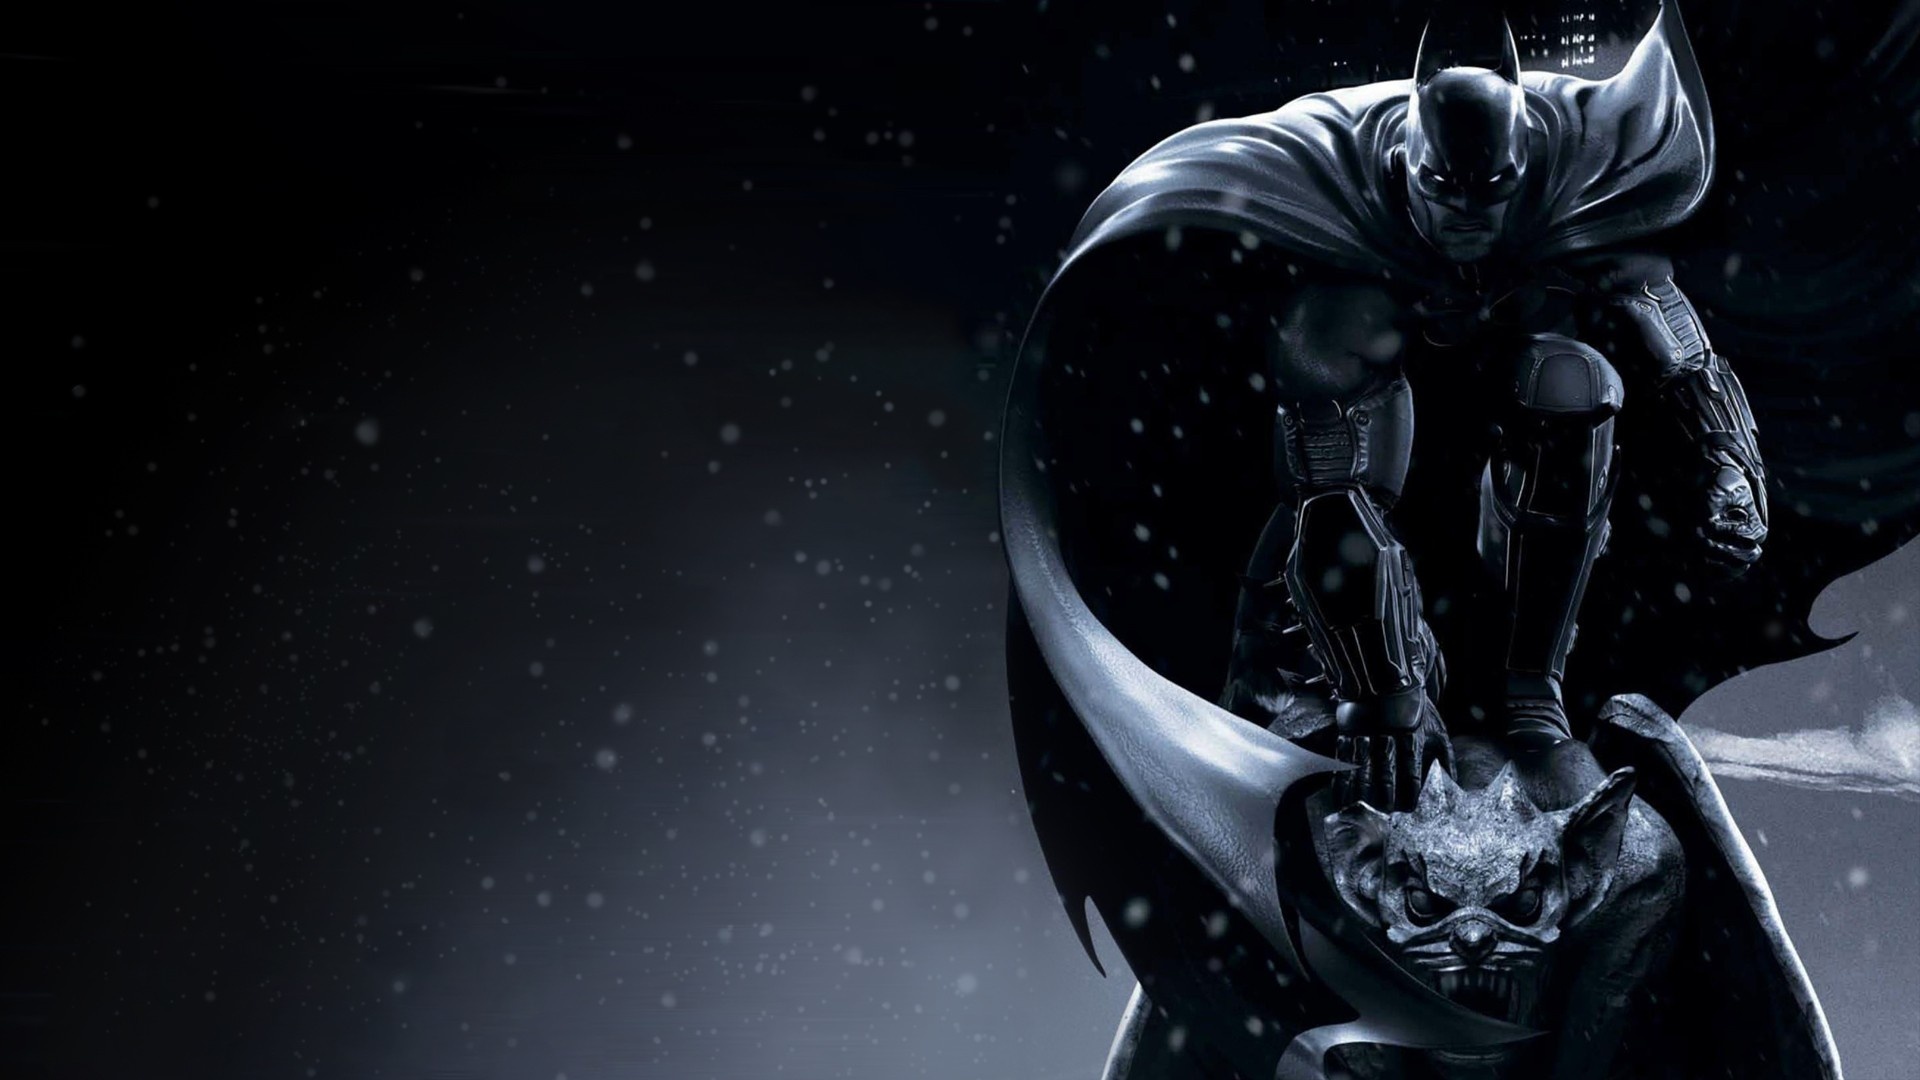 Scroll through these awesome Batman wallpapers below